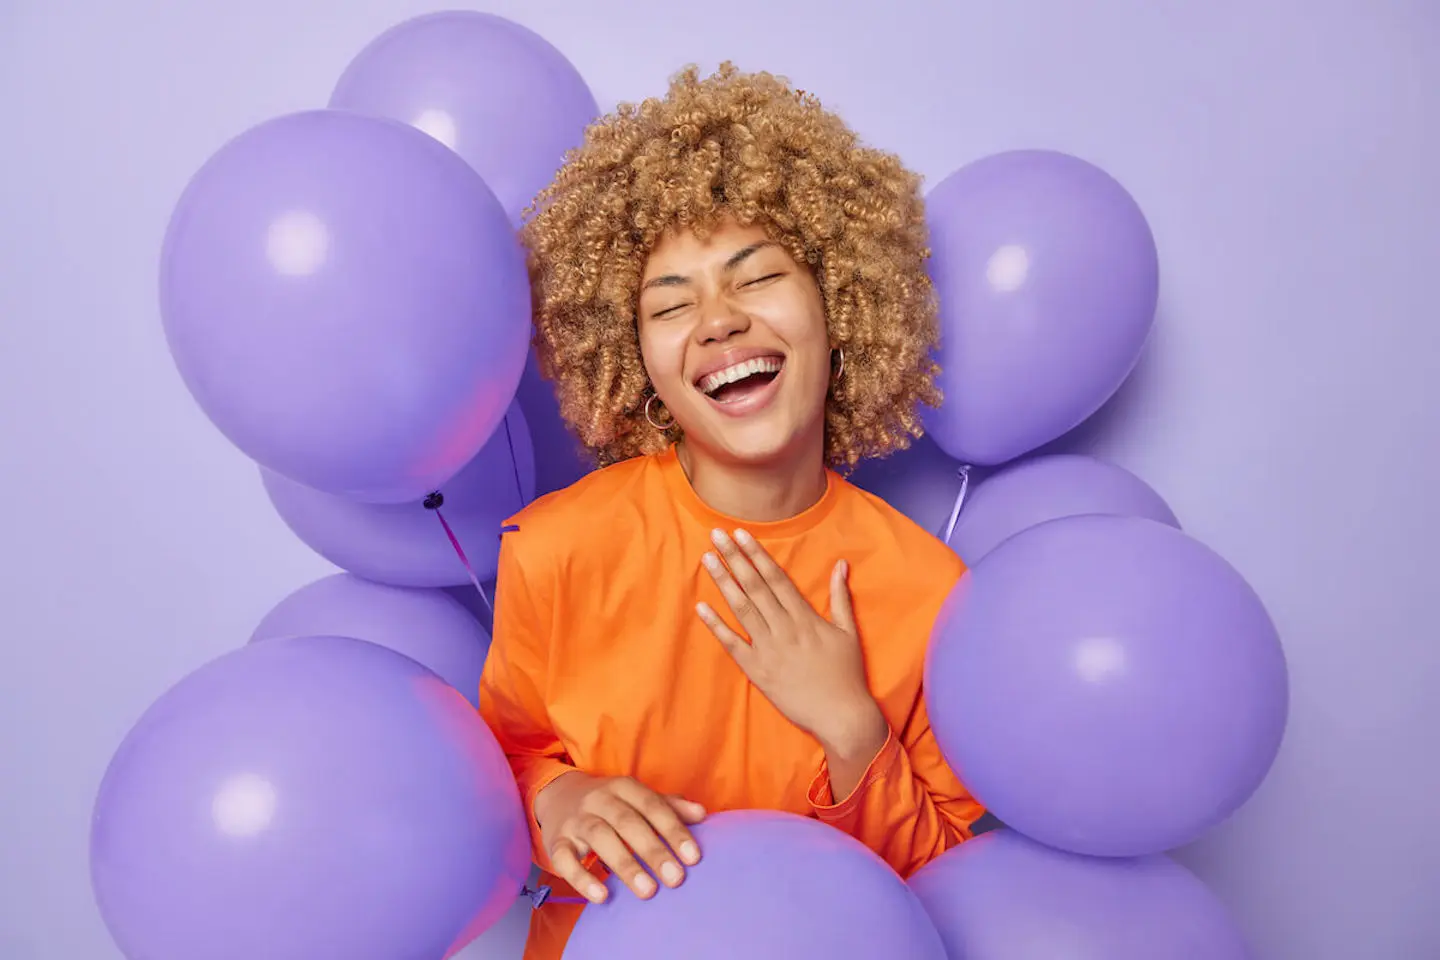 Woman happily smiling with balloons surrounding her